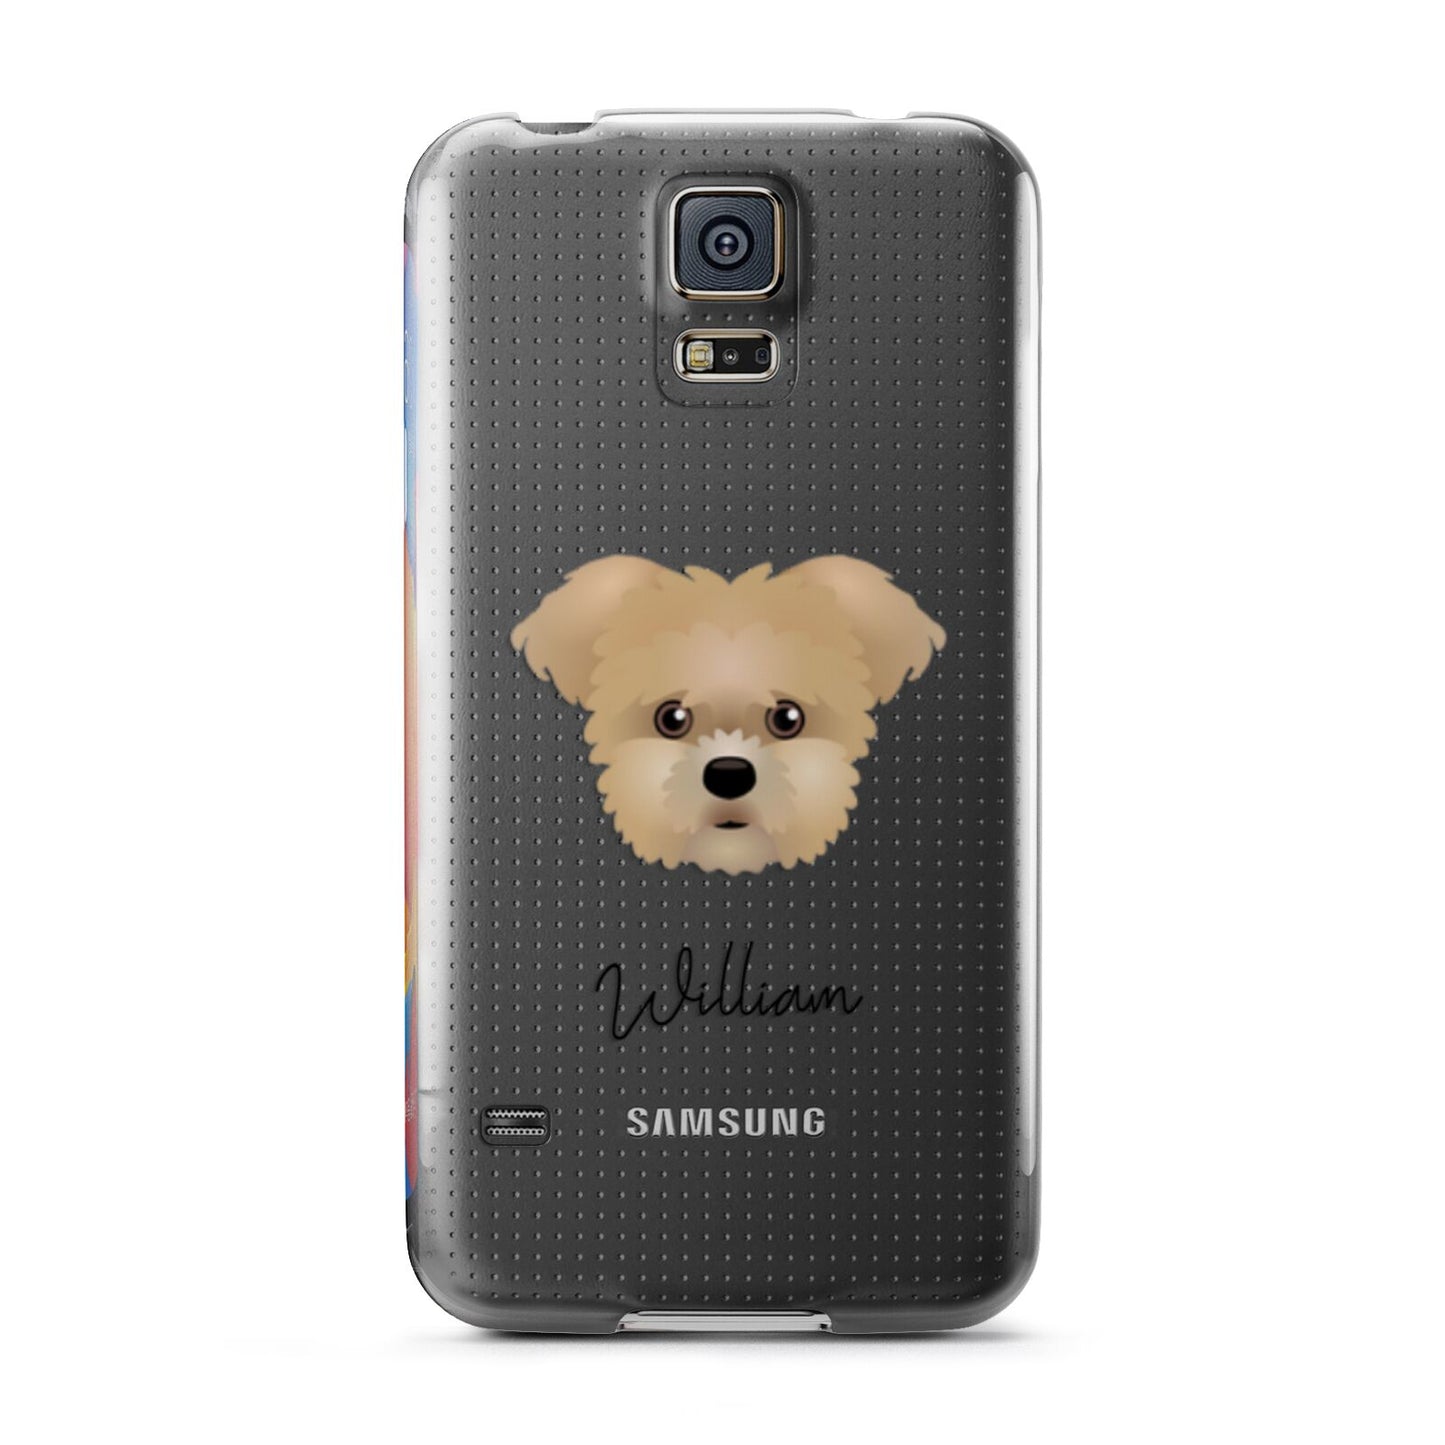 Morkie Personalised Samsung Galaxy S5 Case